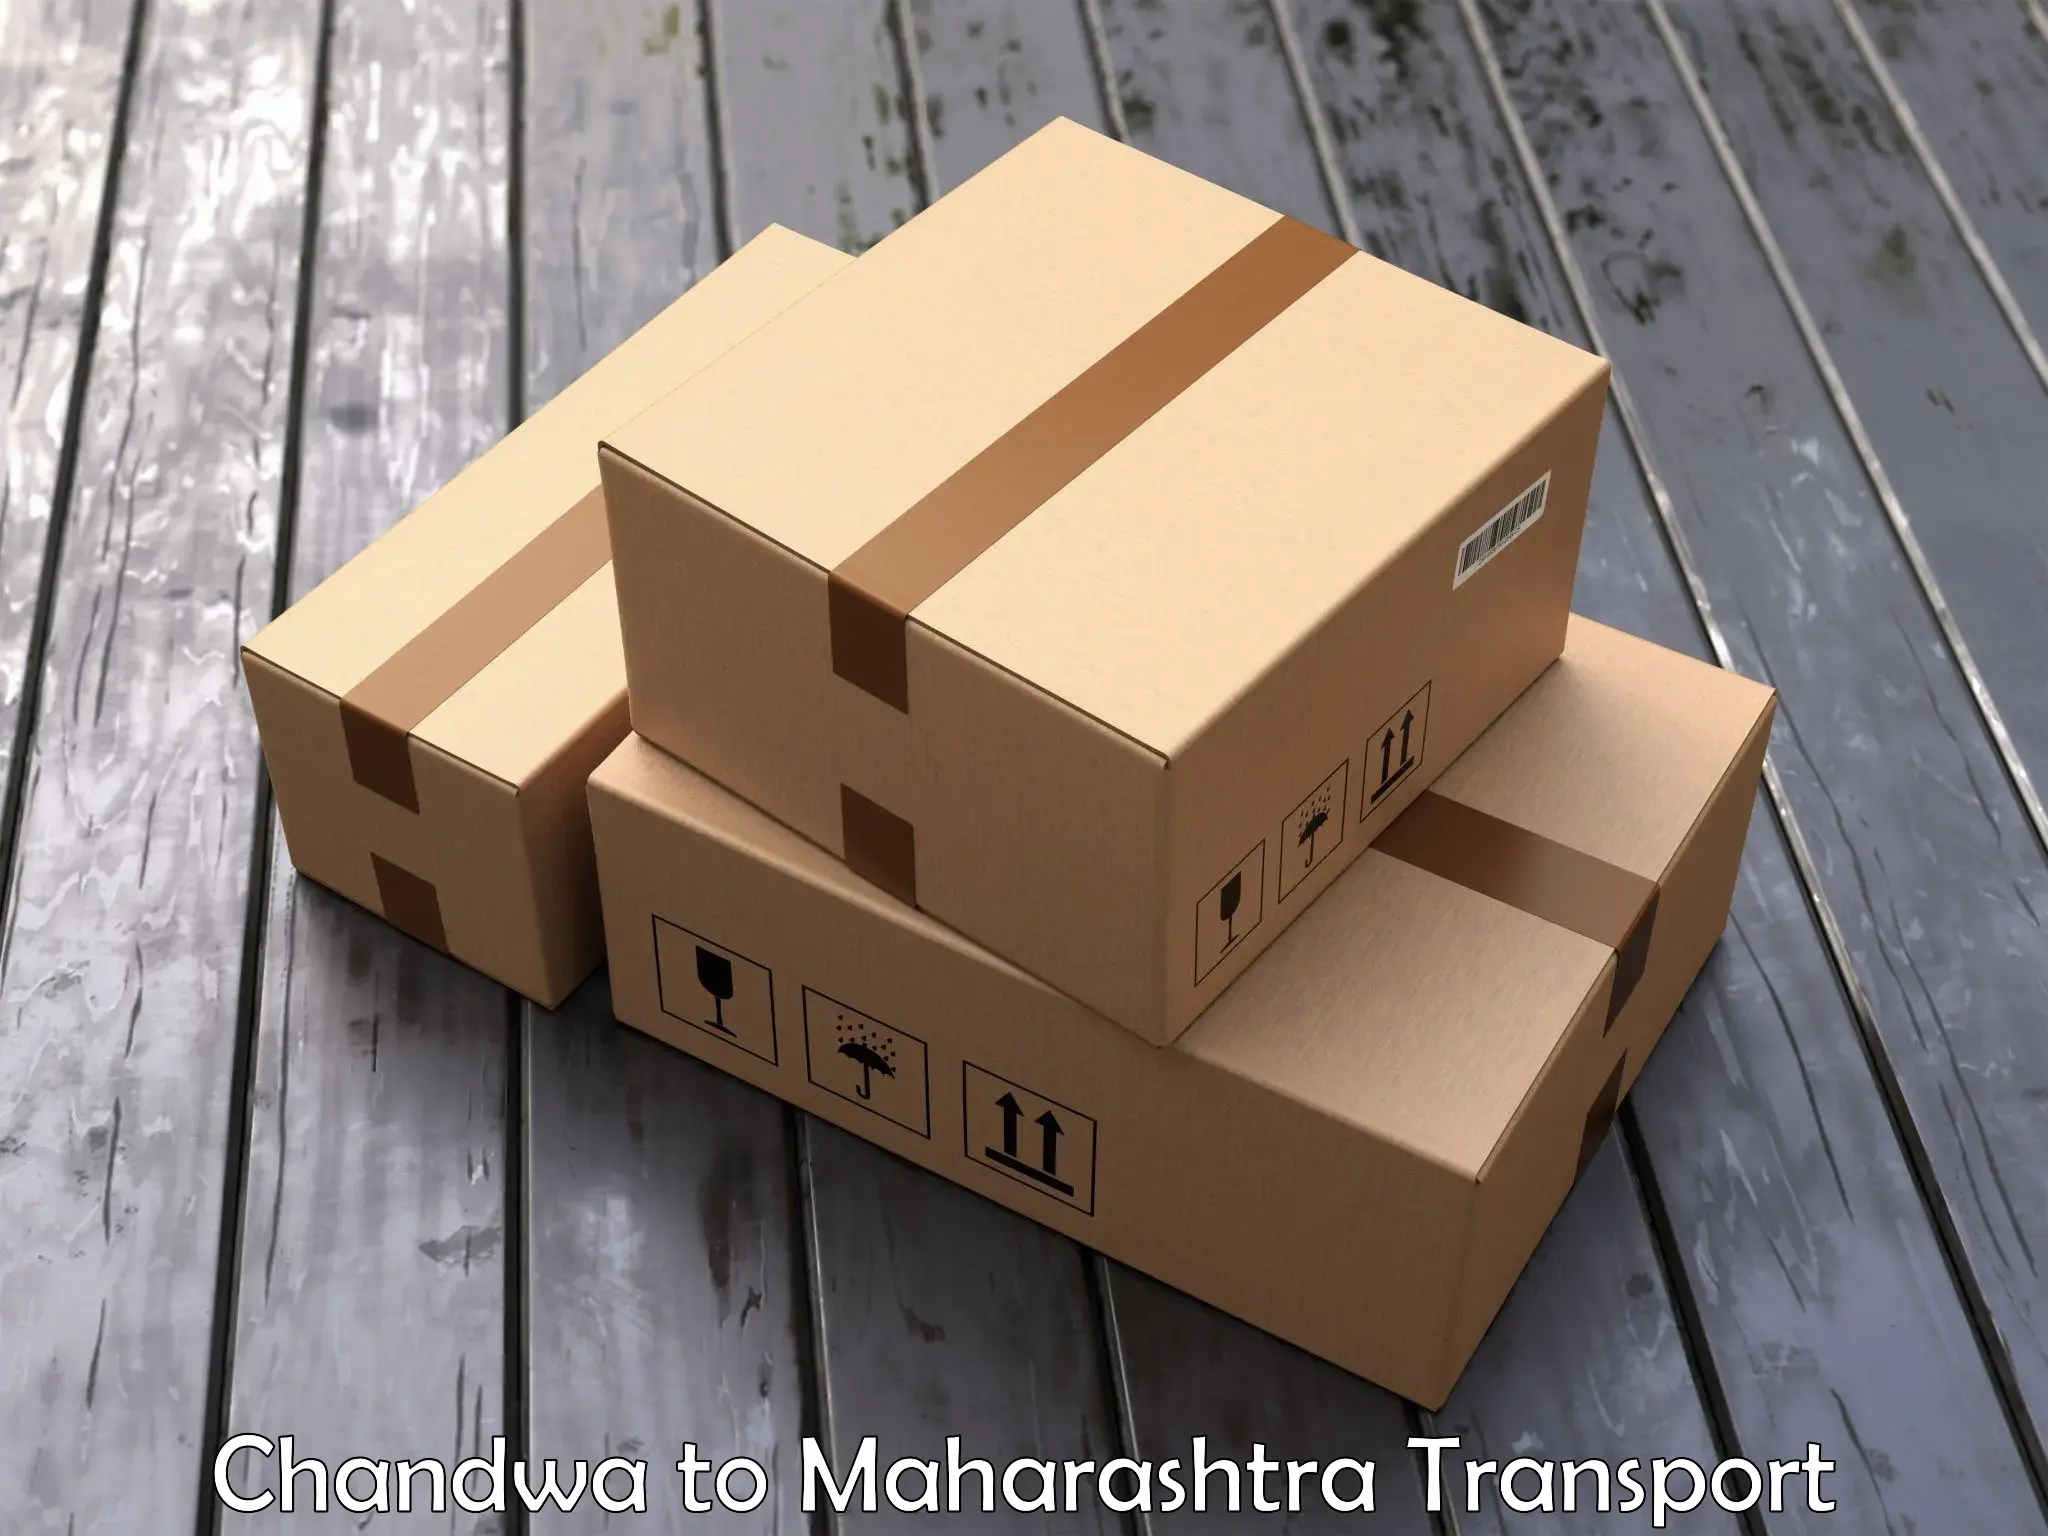 Air freight transport services in Chandwa to Jalna